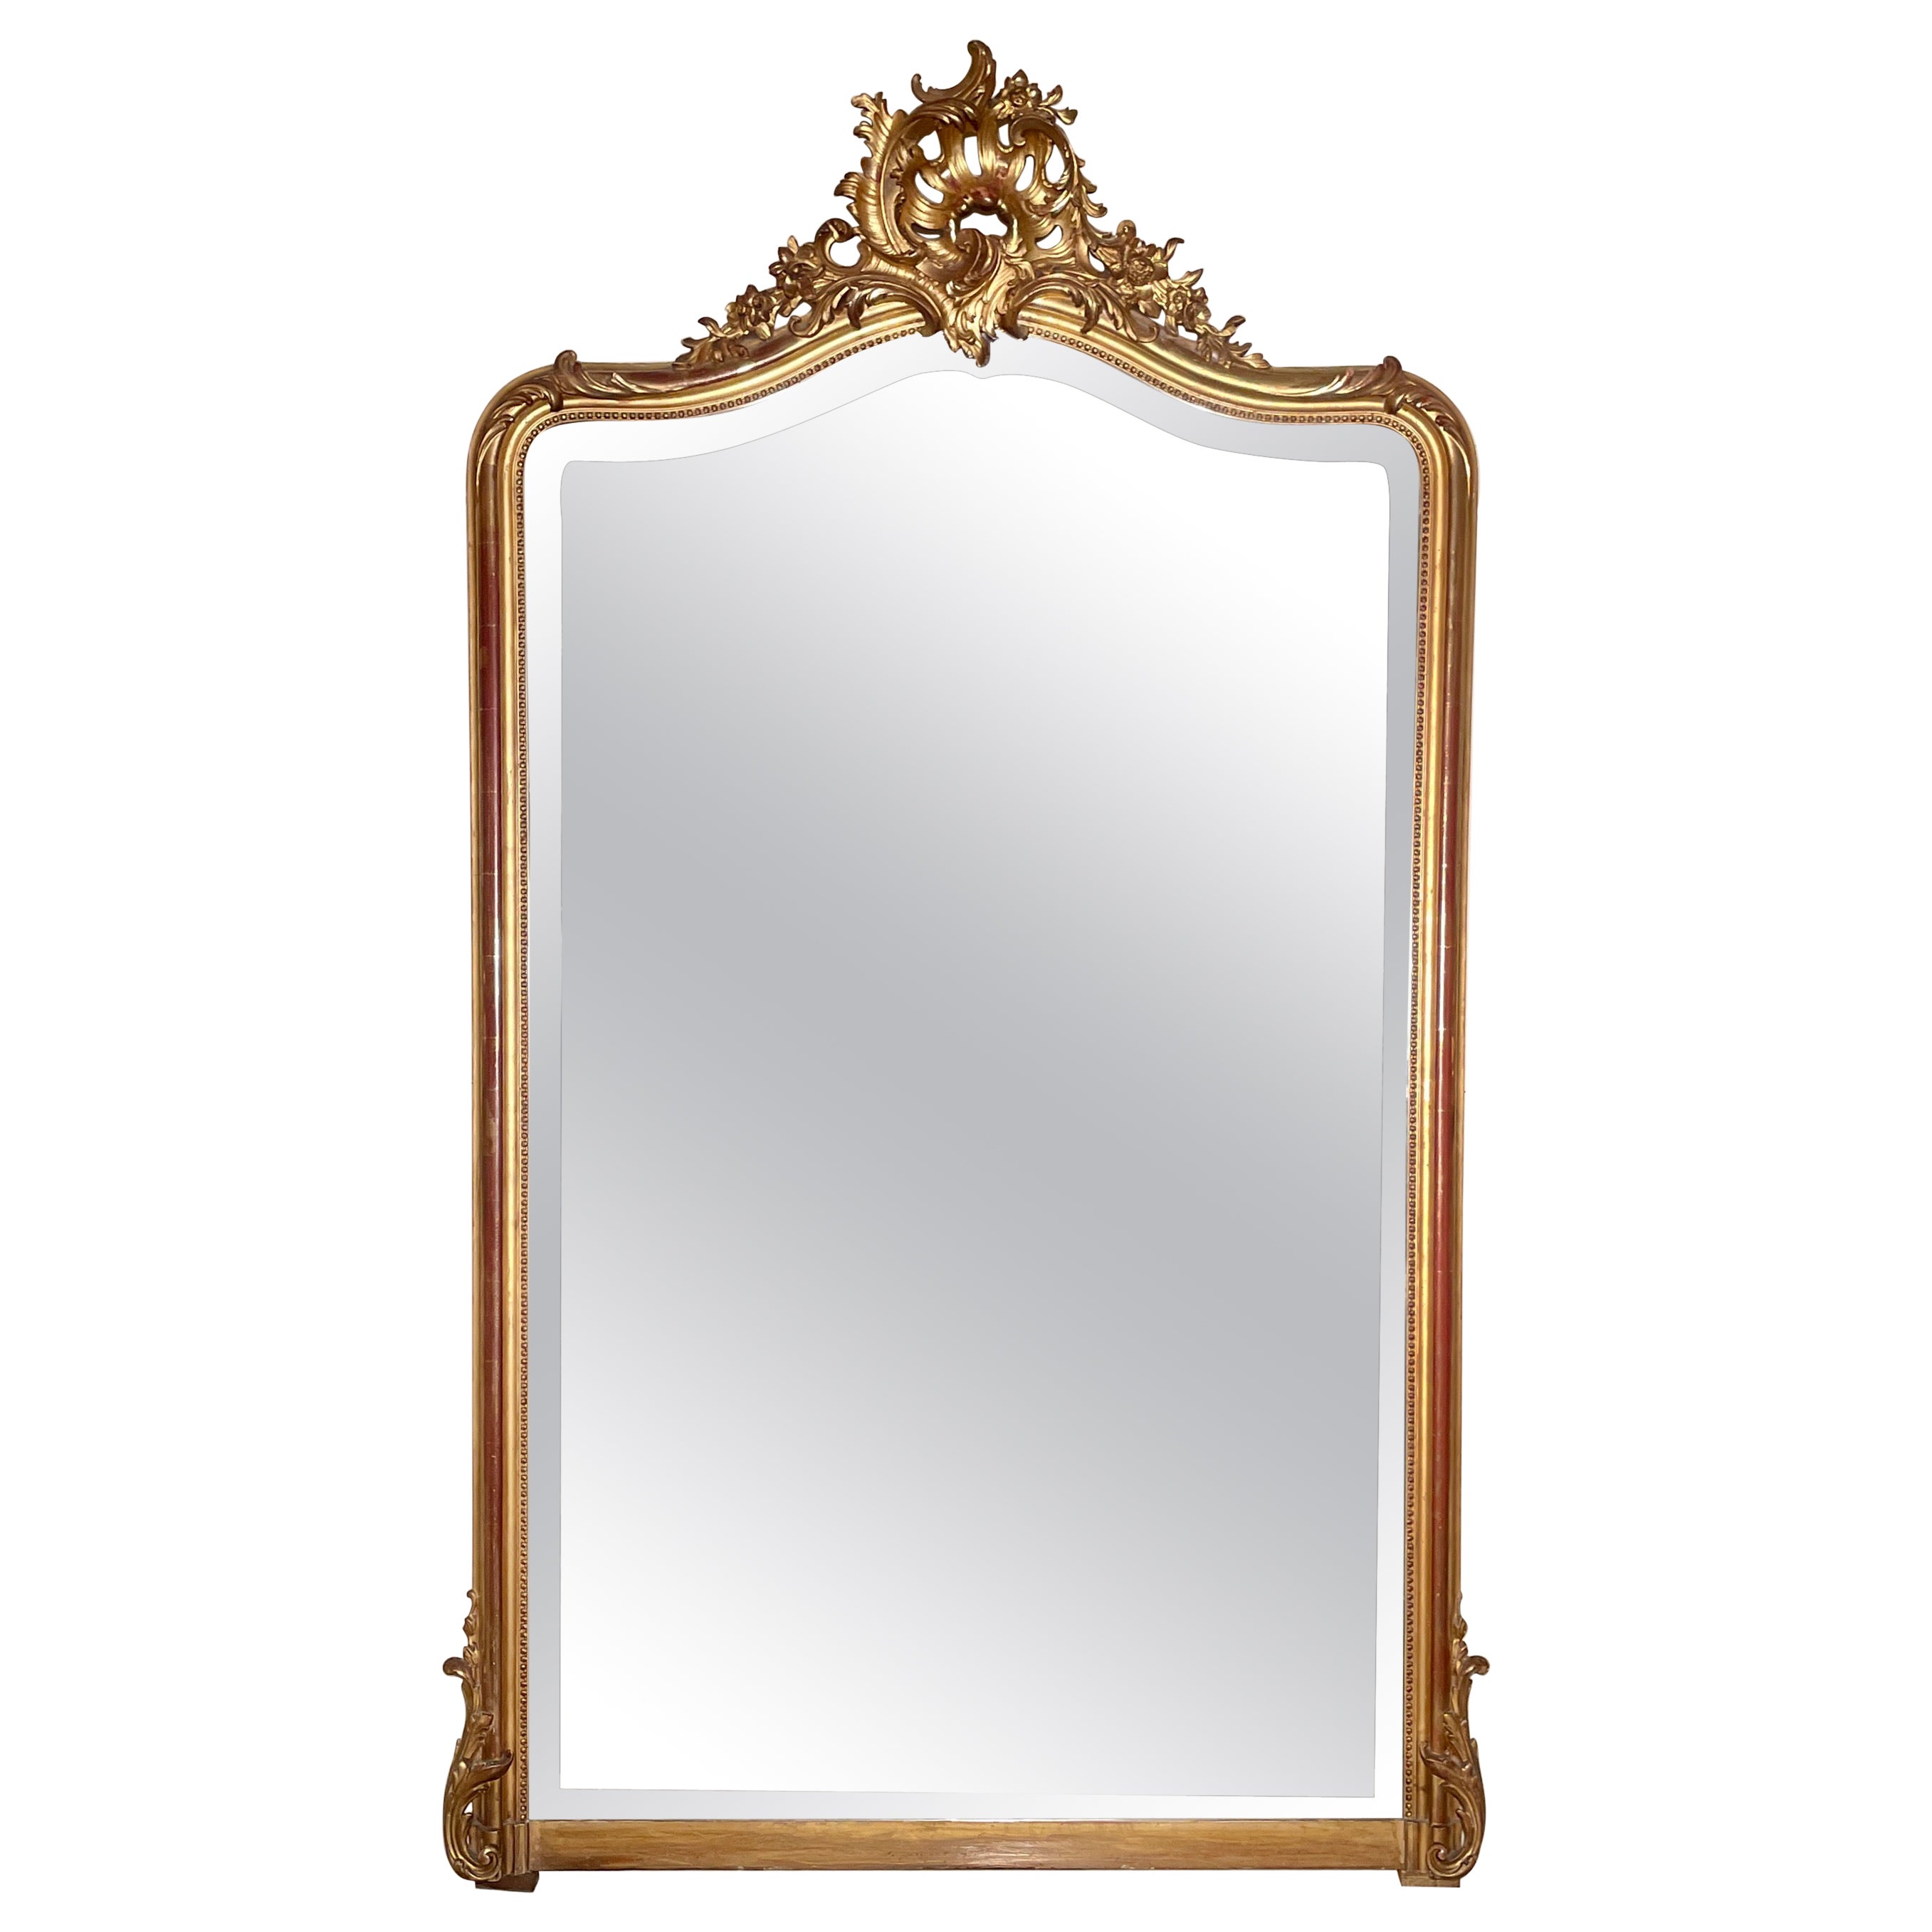 Antique French Louis XV Gold Leaf Mirror with Beveling, circa 1875-1885